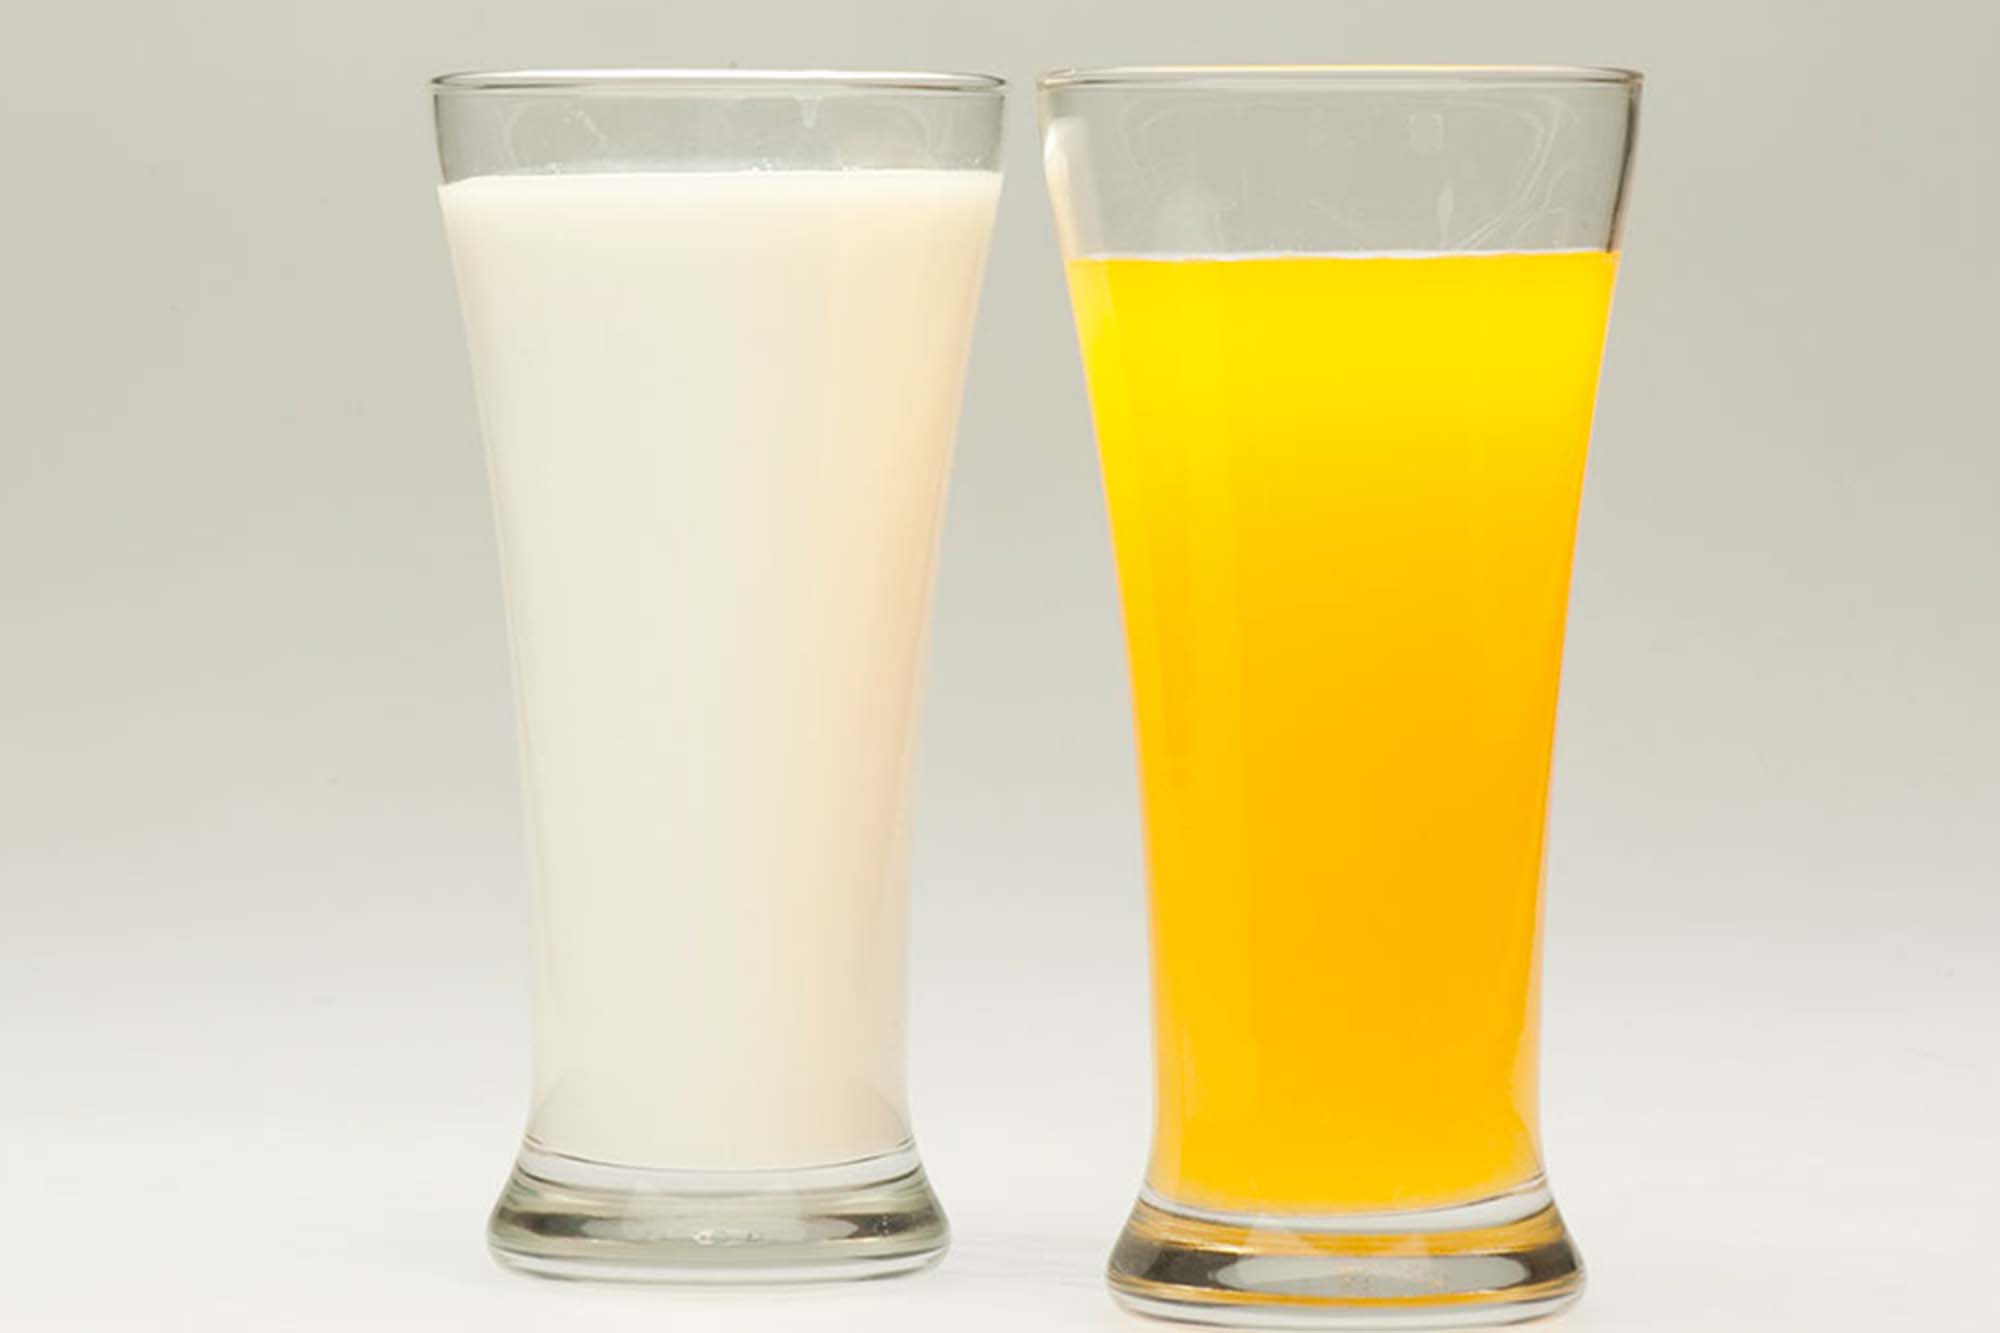 picture of a glass of milk and a glass of orange juice